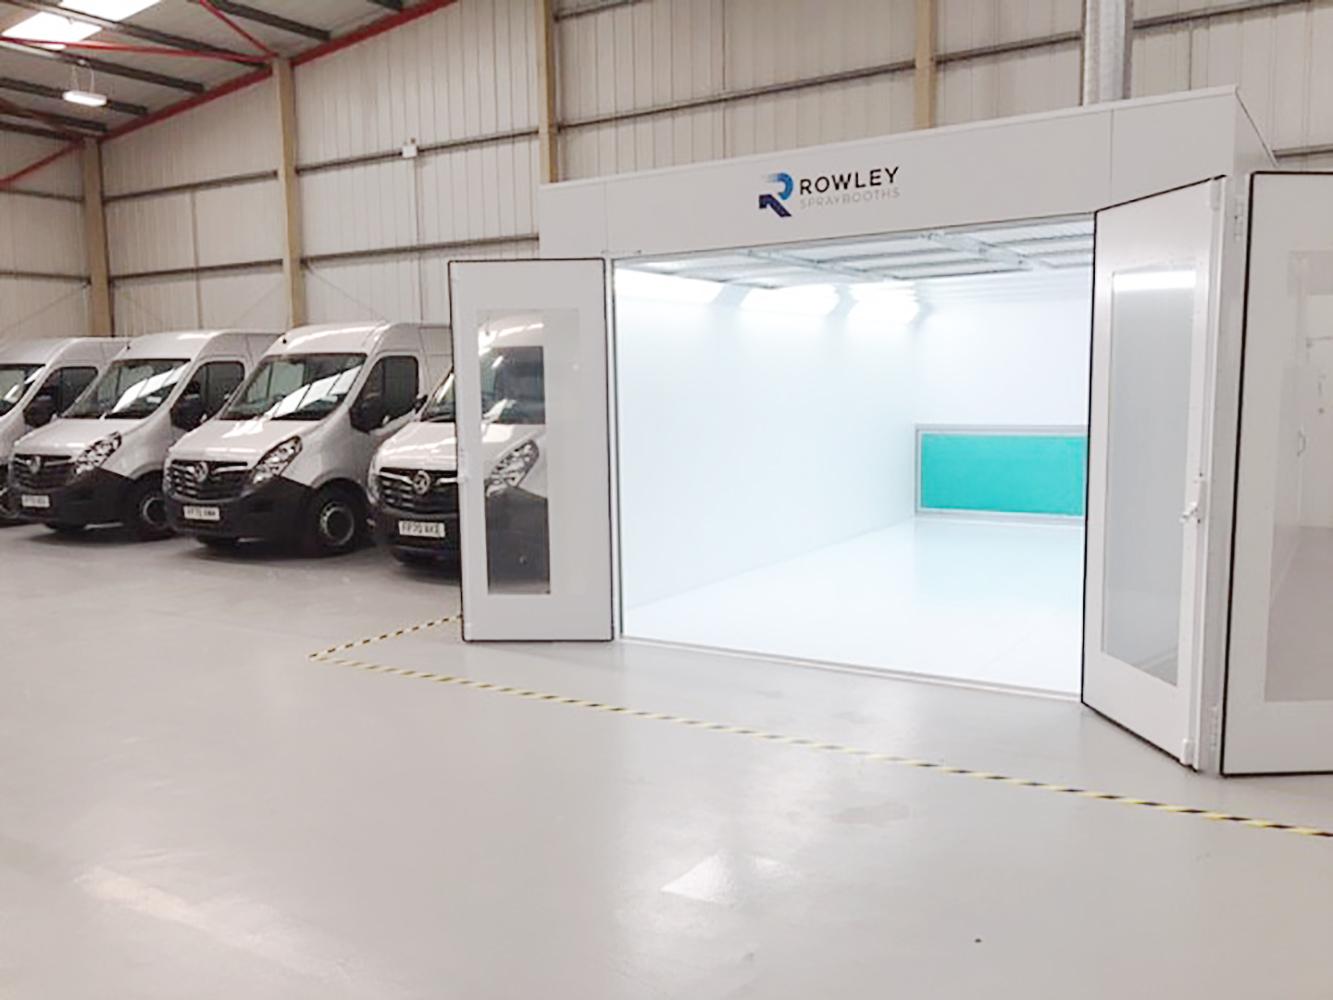 DWV installs new Rowley paint mixing booth